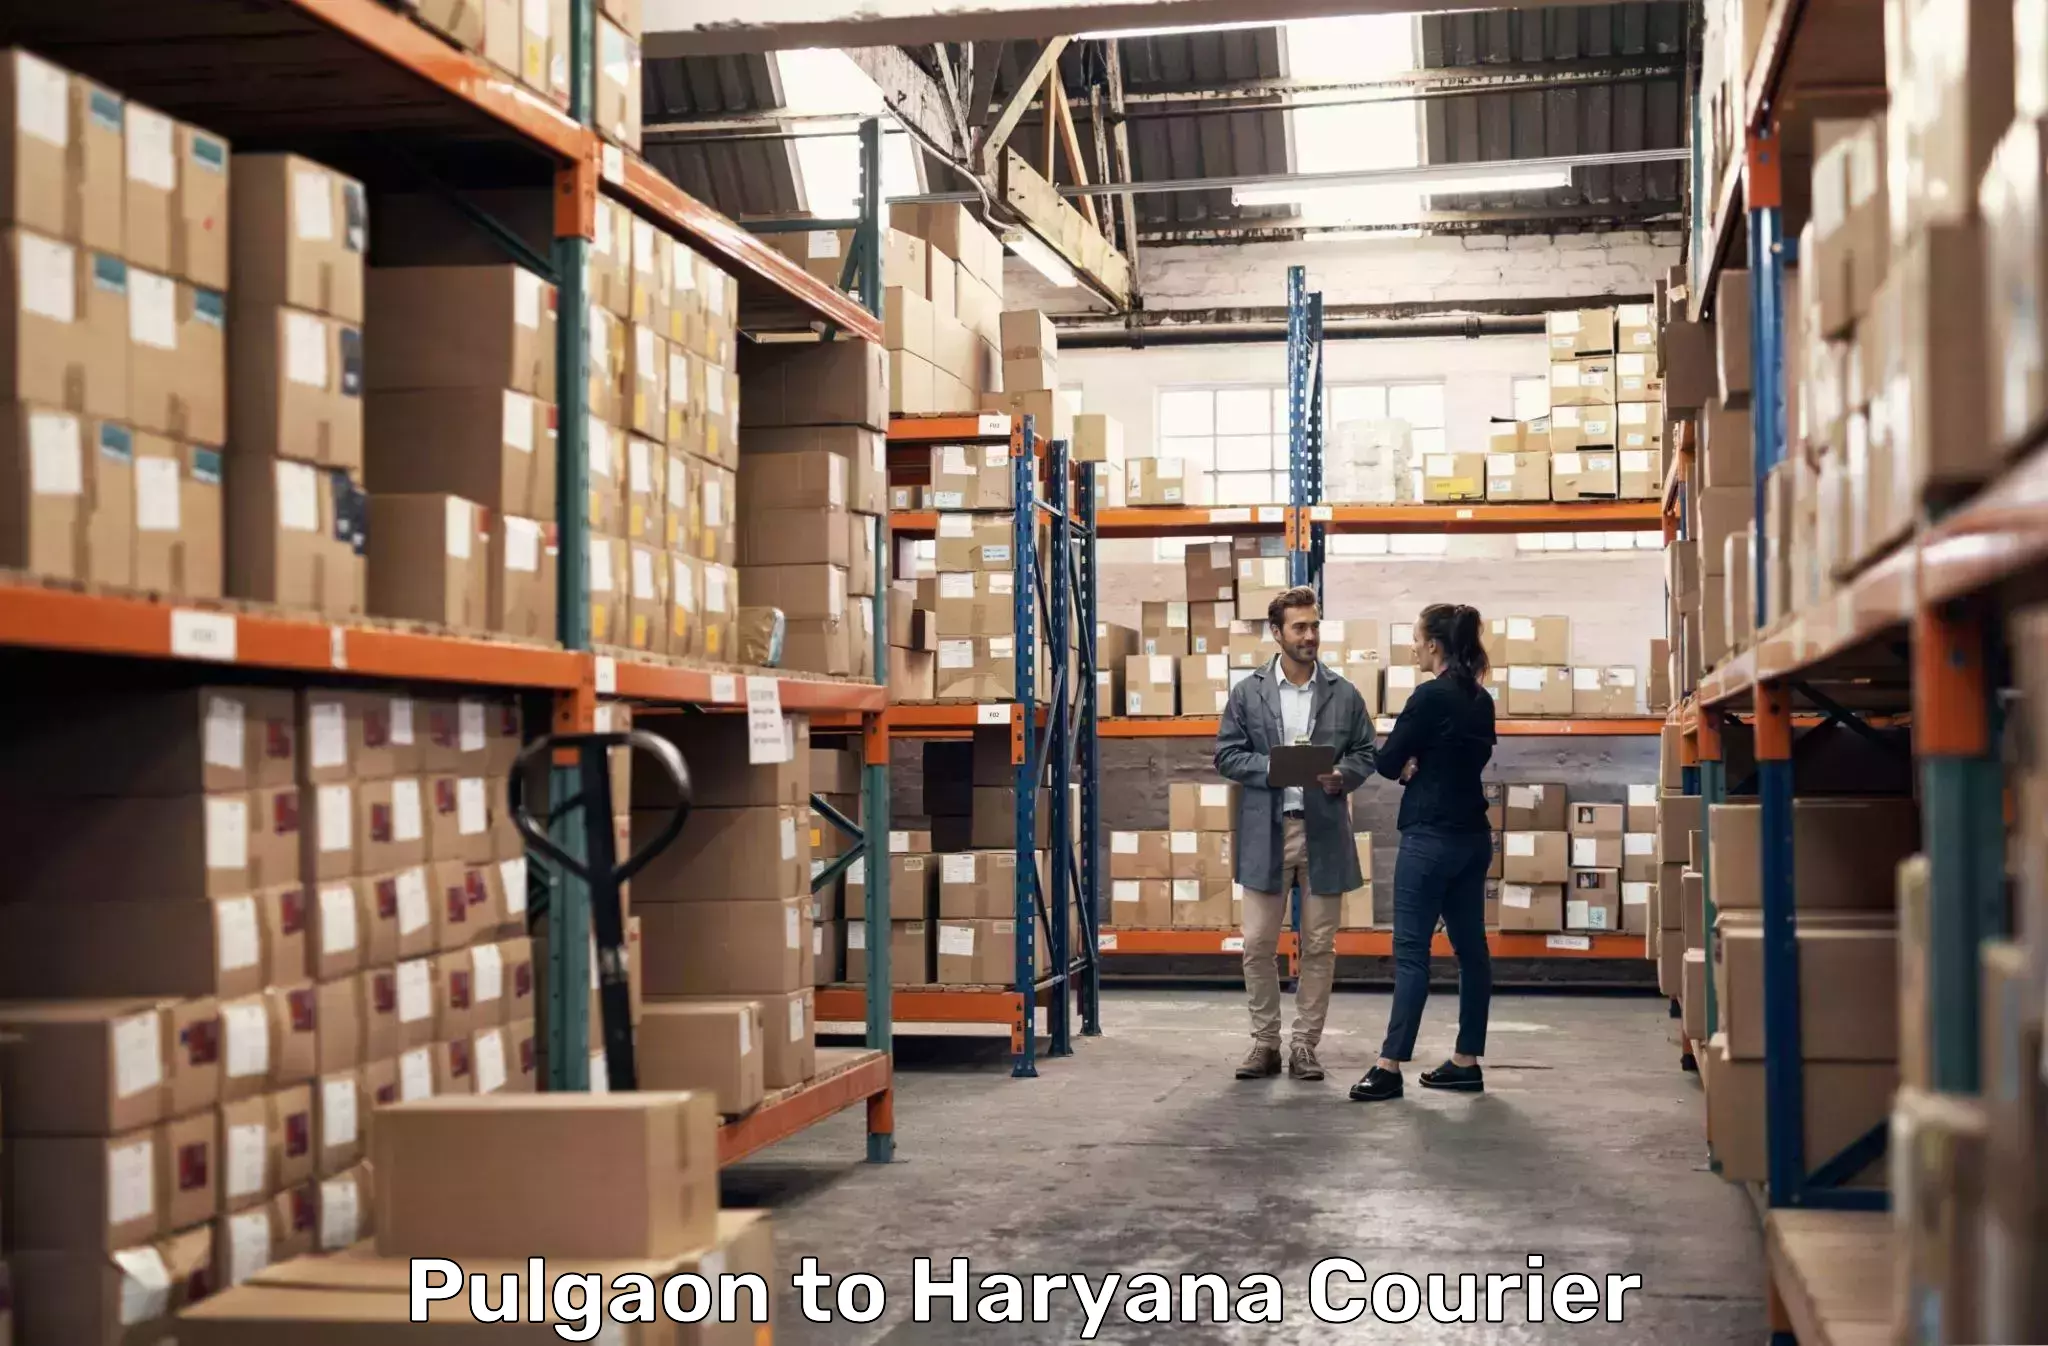 Domestic courier Pulgaon to Bilaspur Haryana